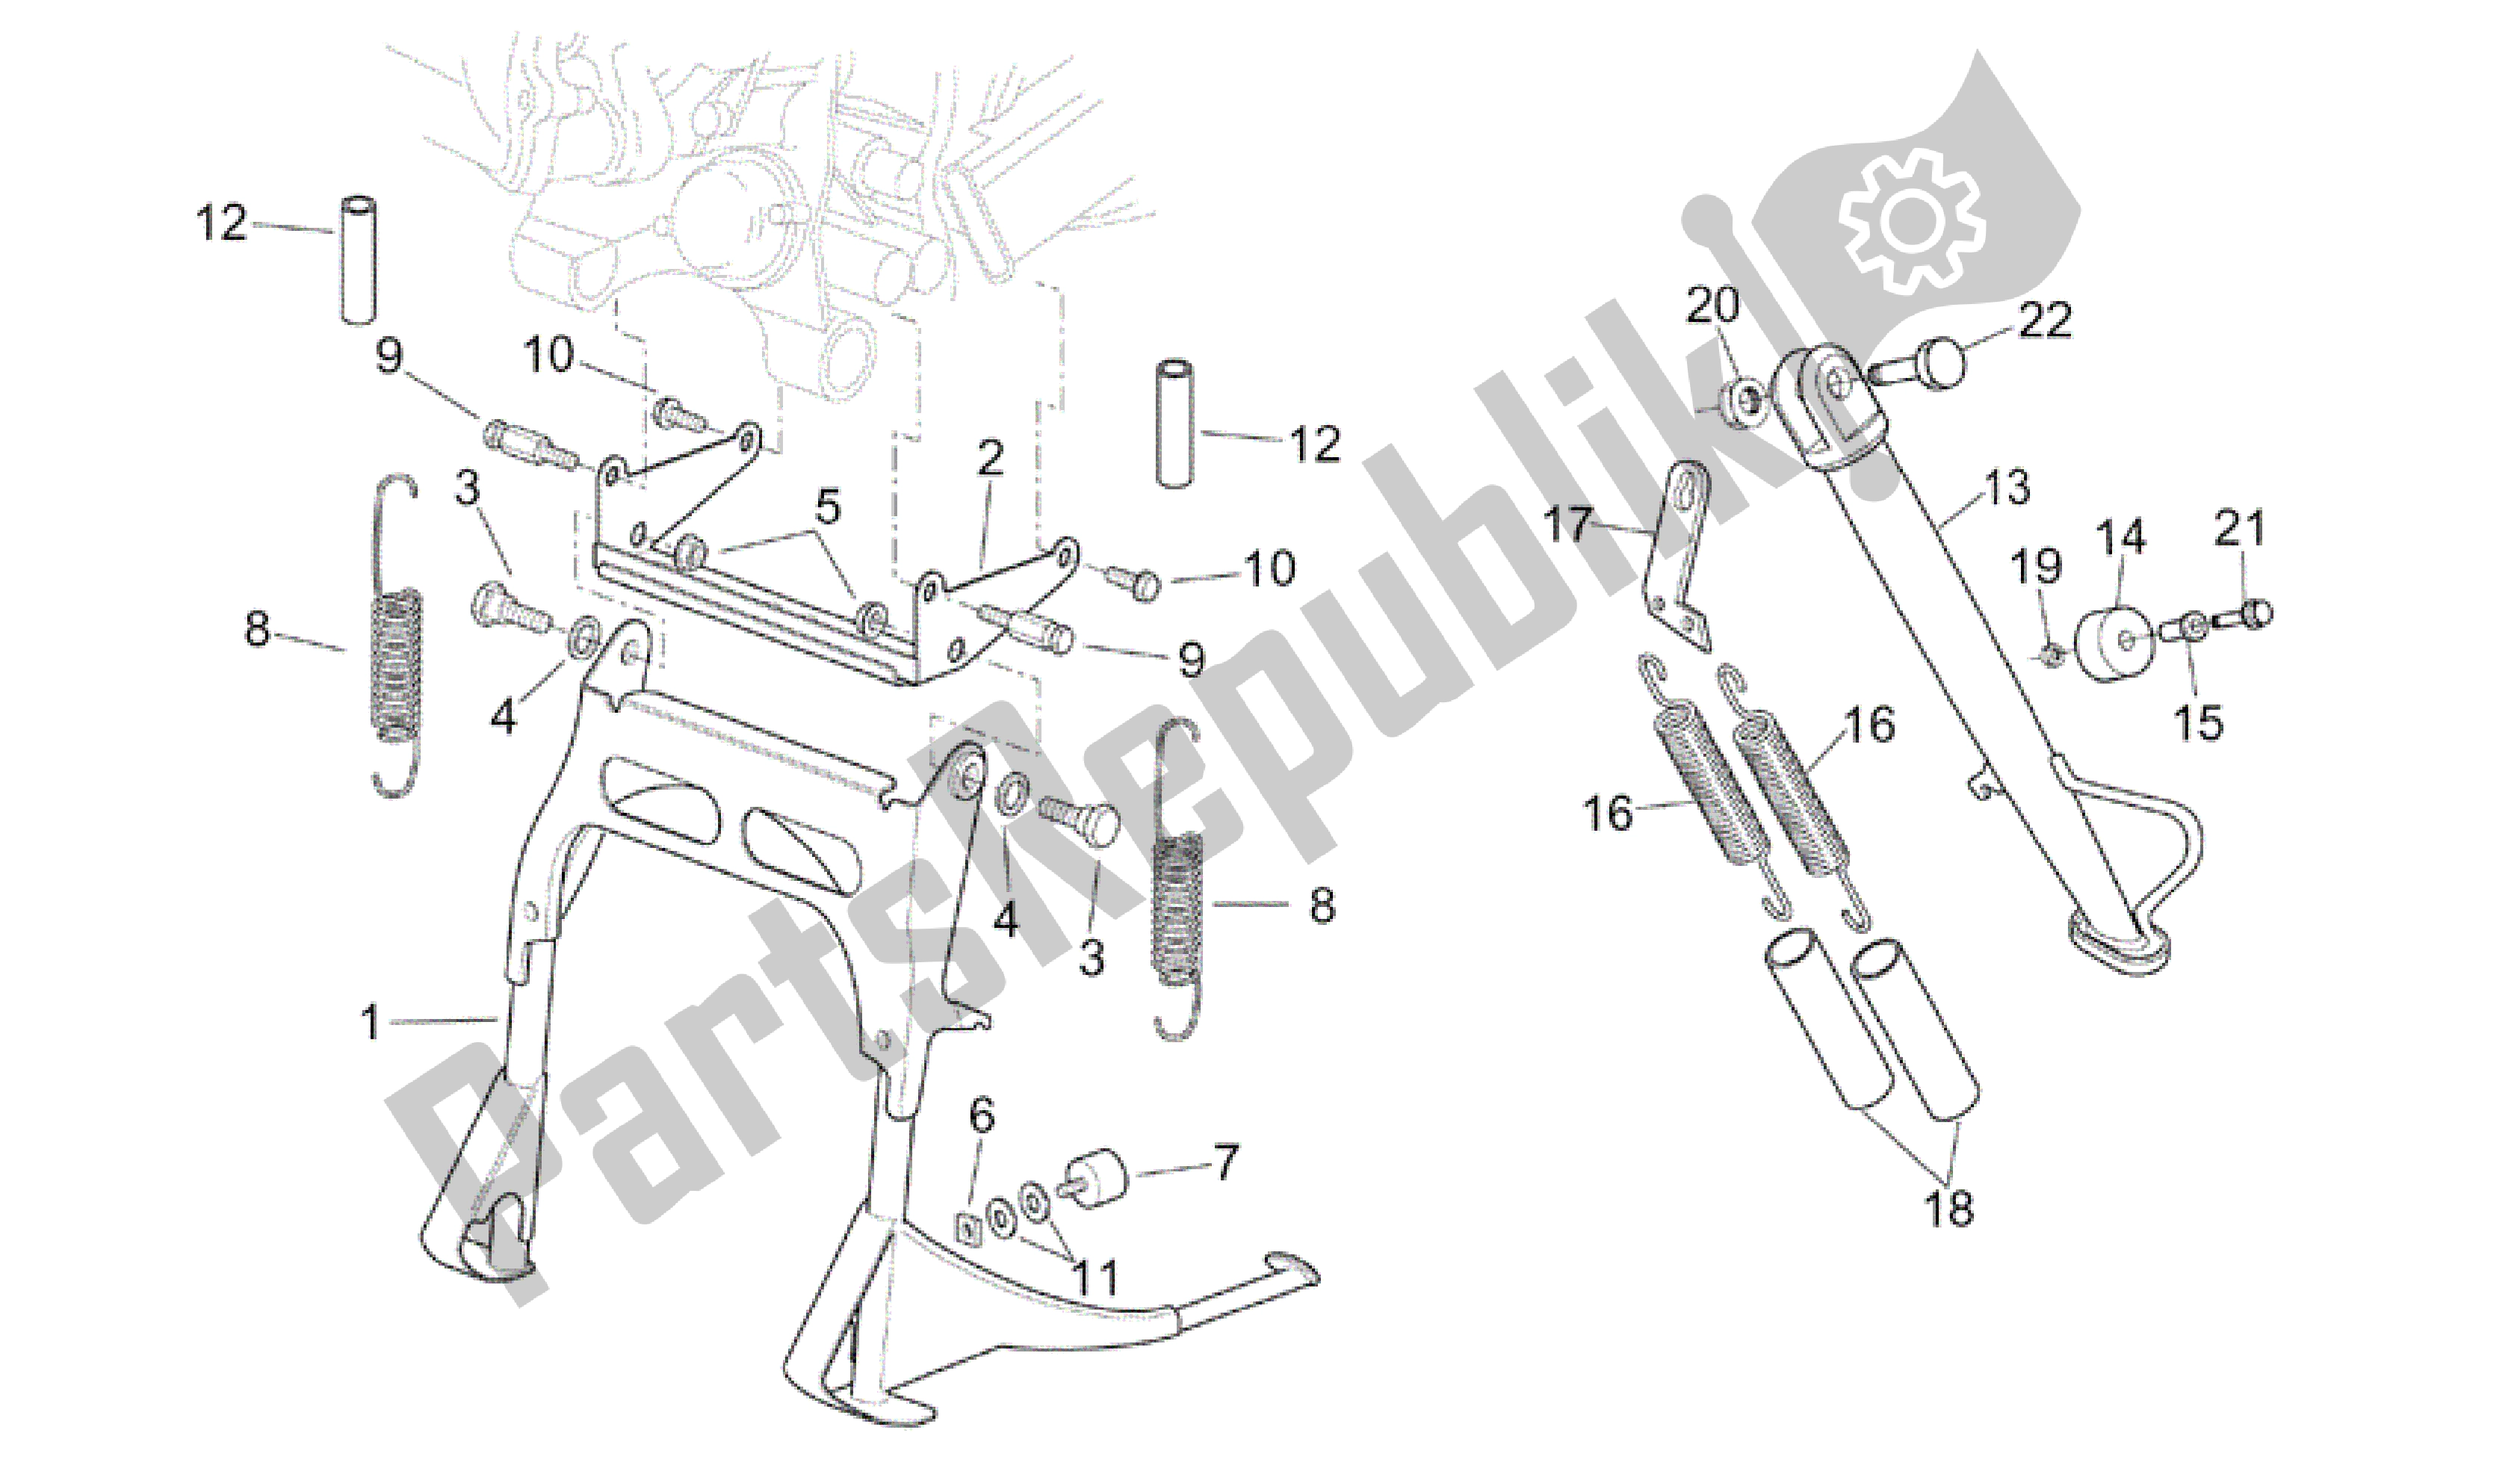 All parts for the Central Stand of the Aprilia Scarabeo 150 1999 - 2004